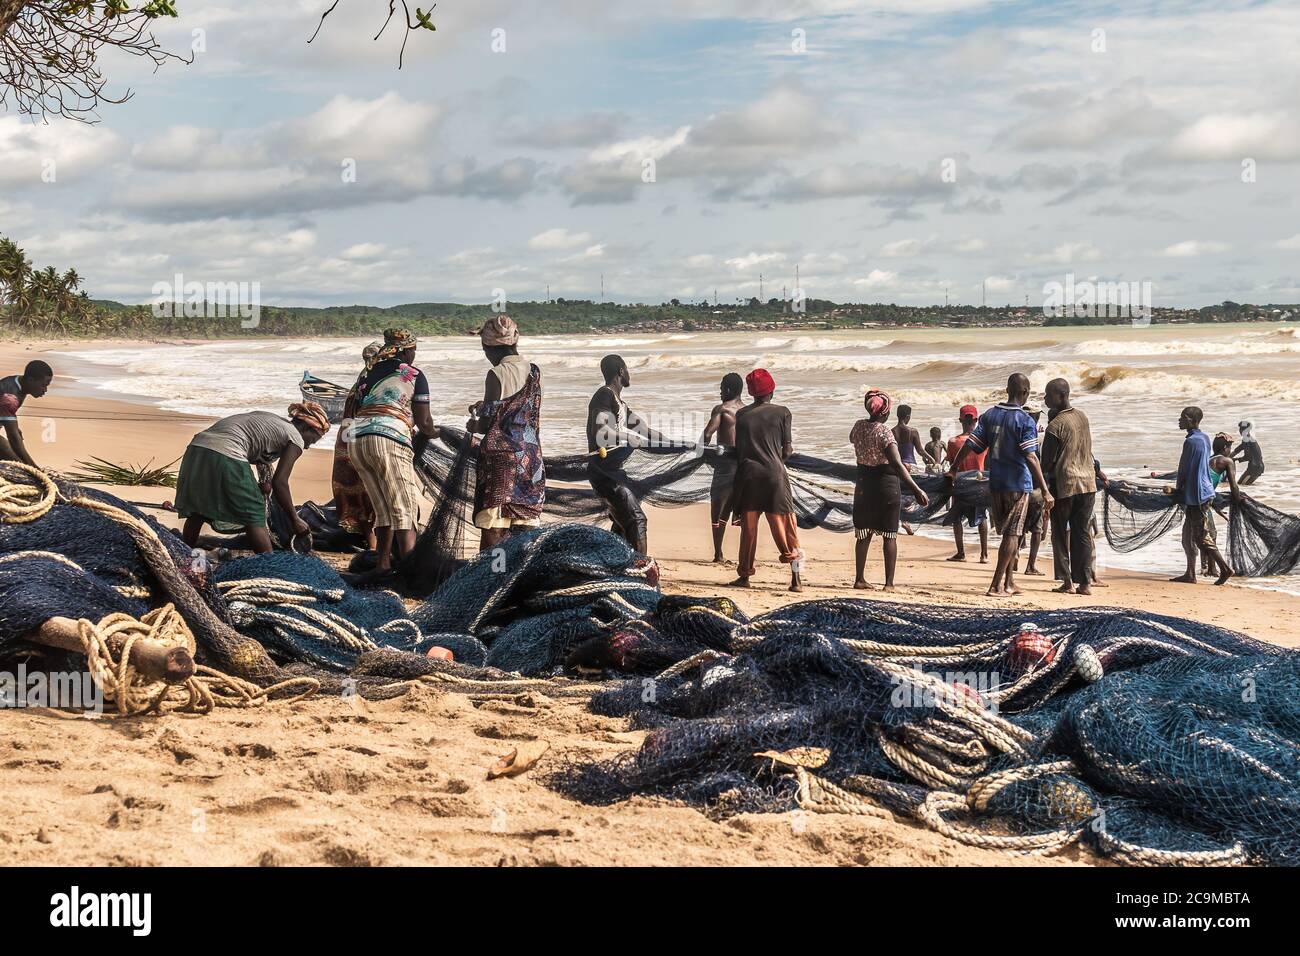 Fishing people on the beach cooperate with fish catch in Africa gold coast. Axim beach is located in Ghana West Africa. Photo 2018 October 31 Stock Photo